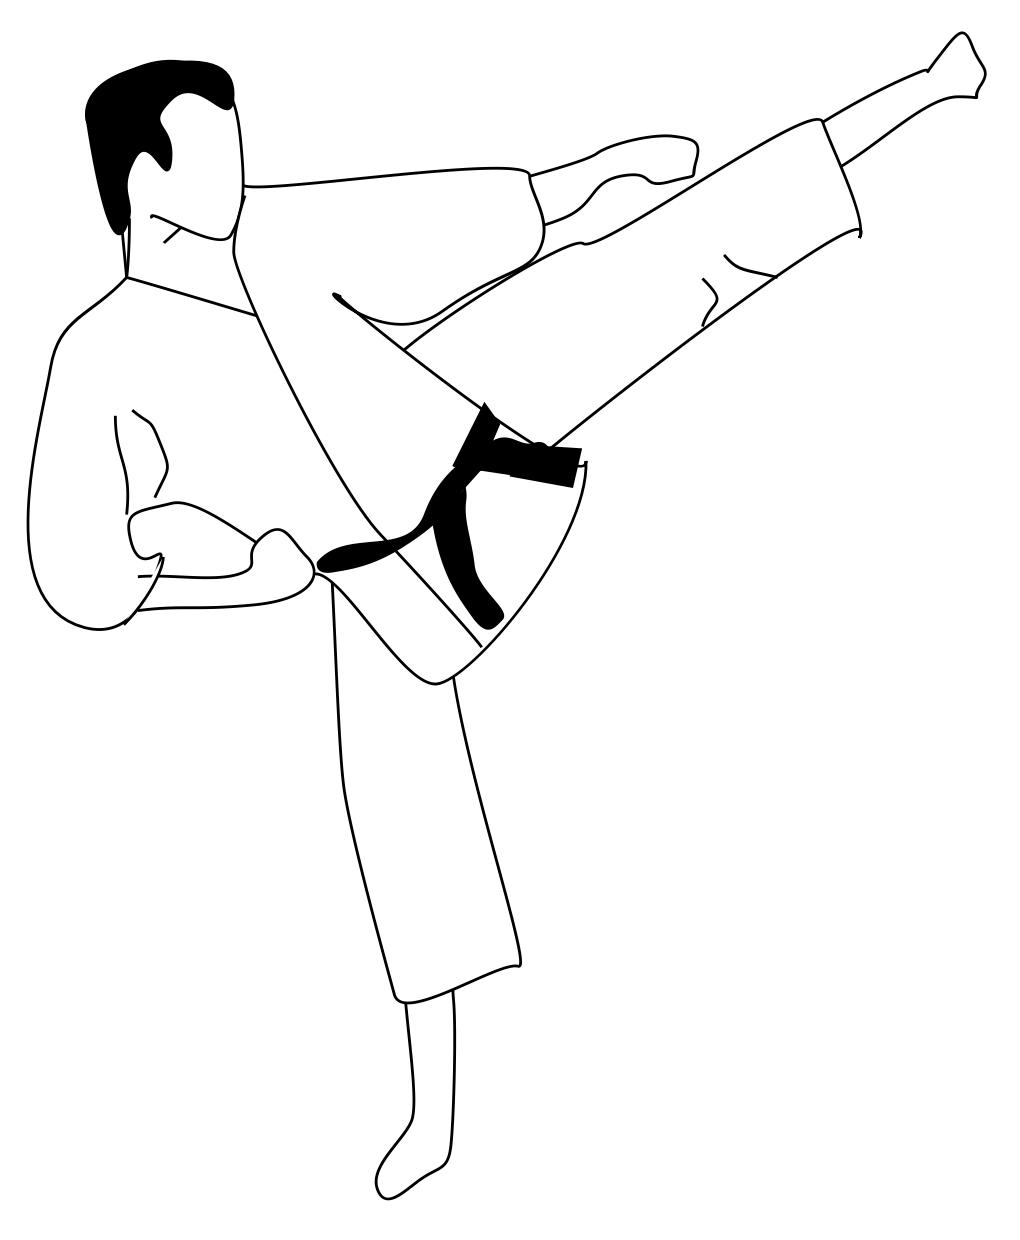 Coloring page karate